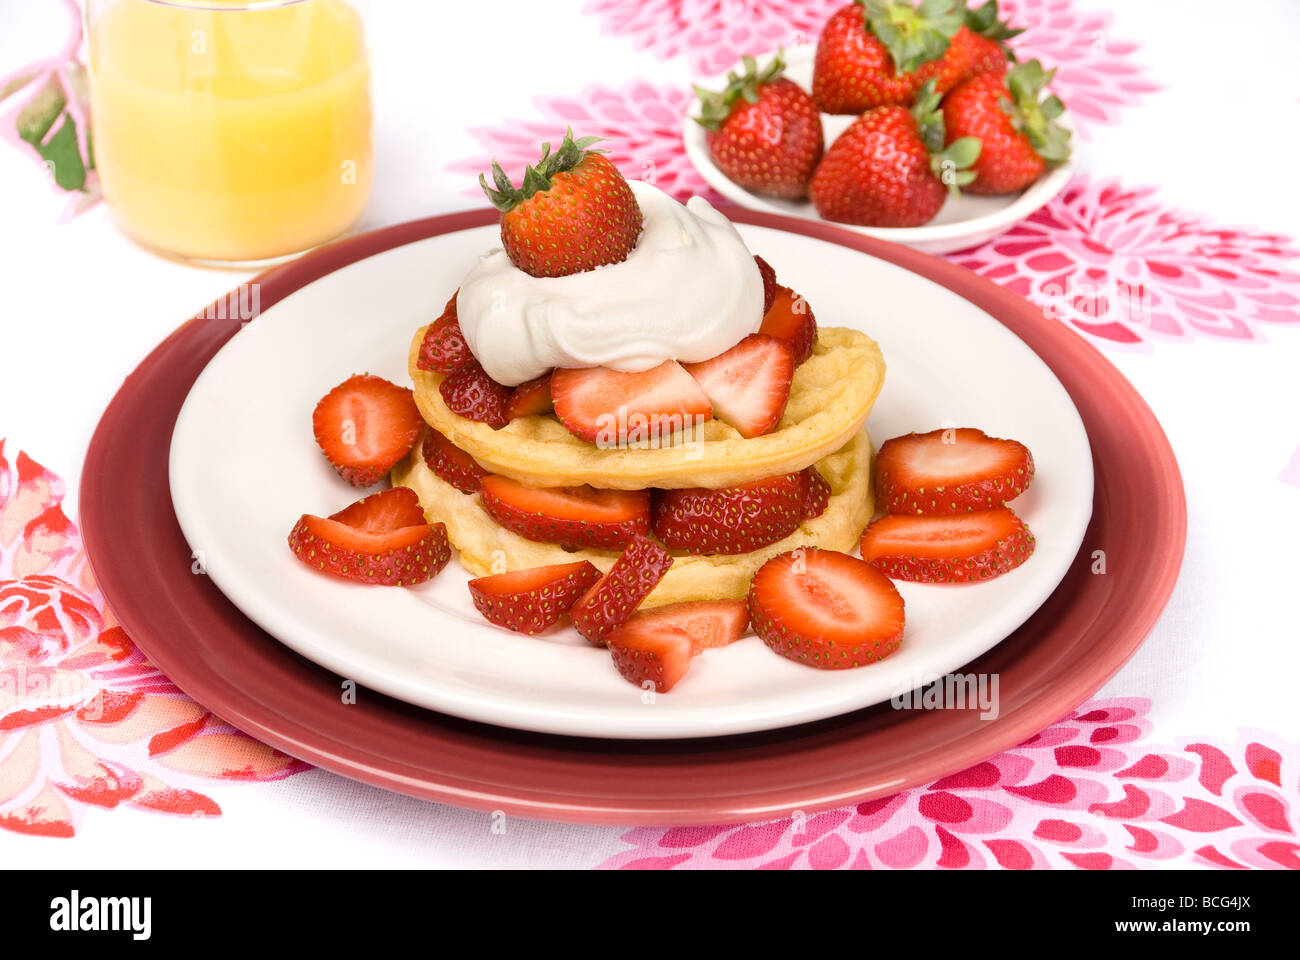 A delicious breakfast meal of strawberry waffles with whipped cream and orange juice Stock Photo